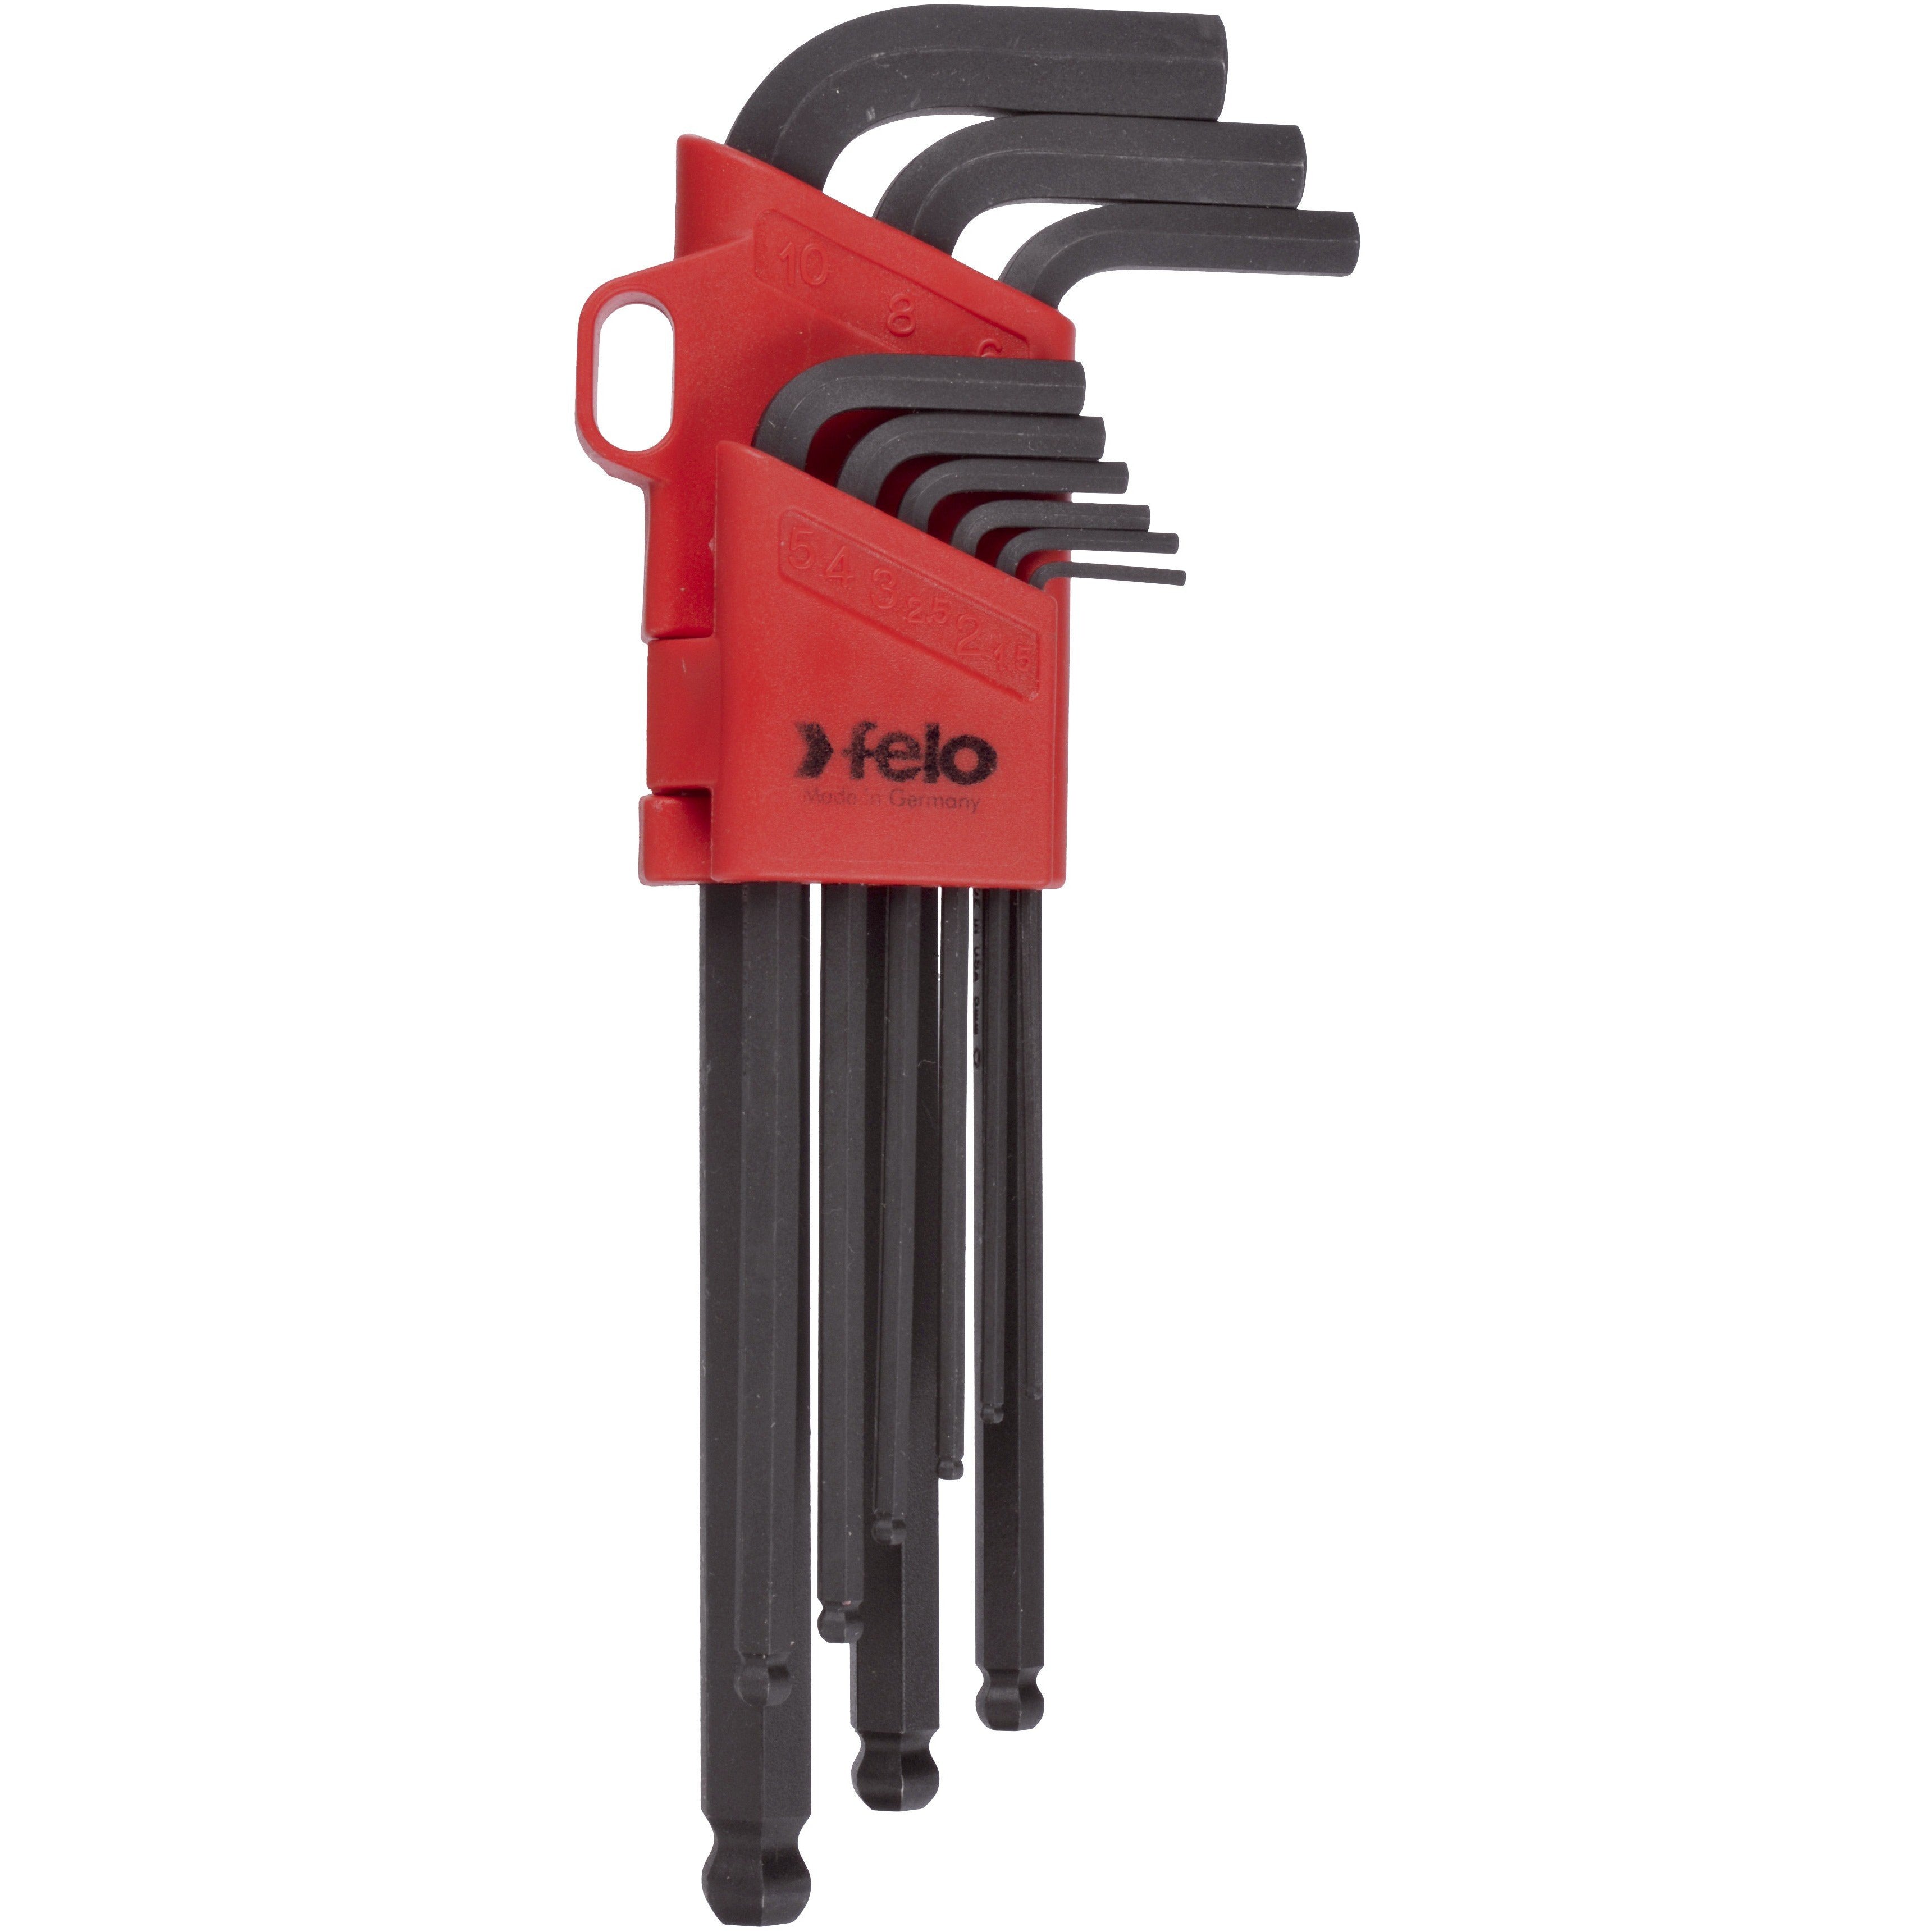 Felo Hex Wrench Set 1.5-10mm (9pc)-Hand Tools-Tool Factory